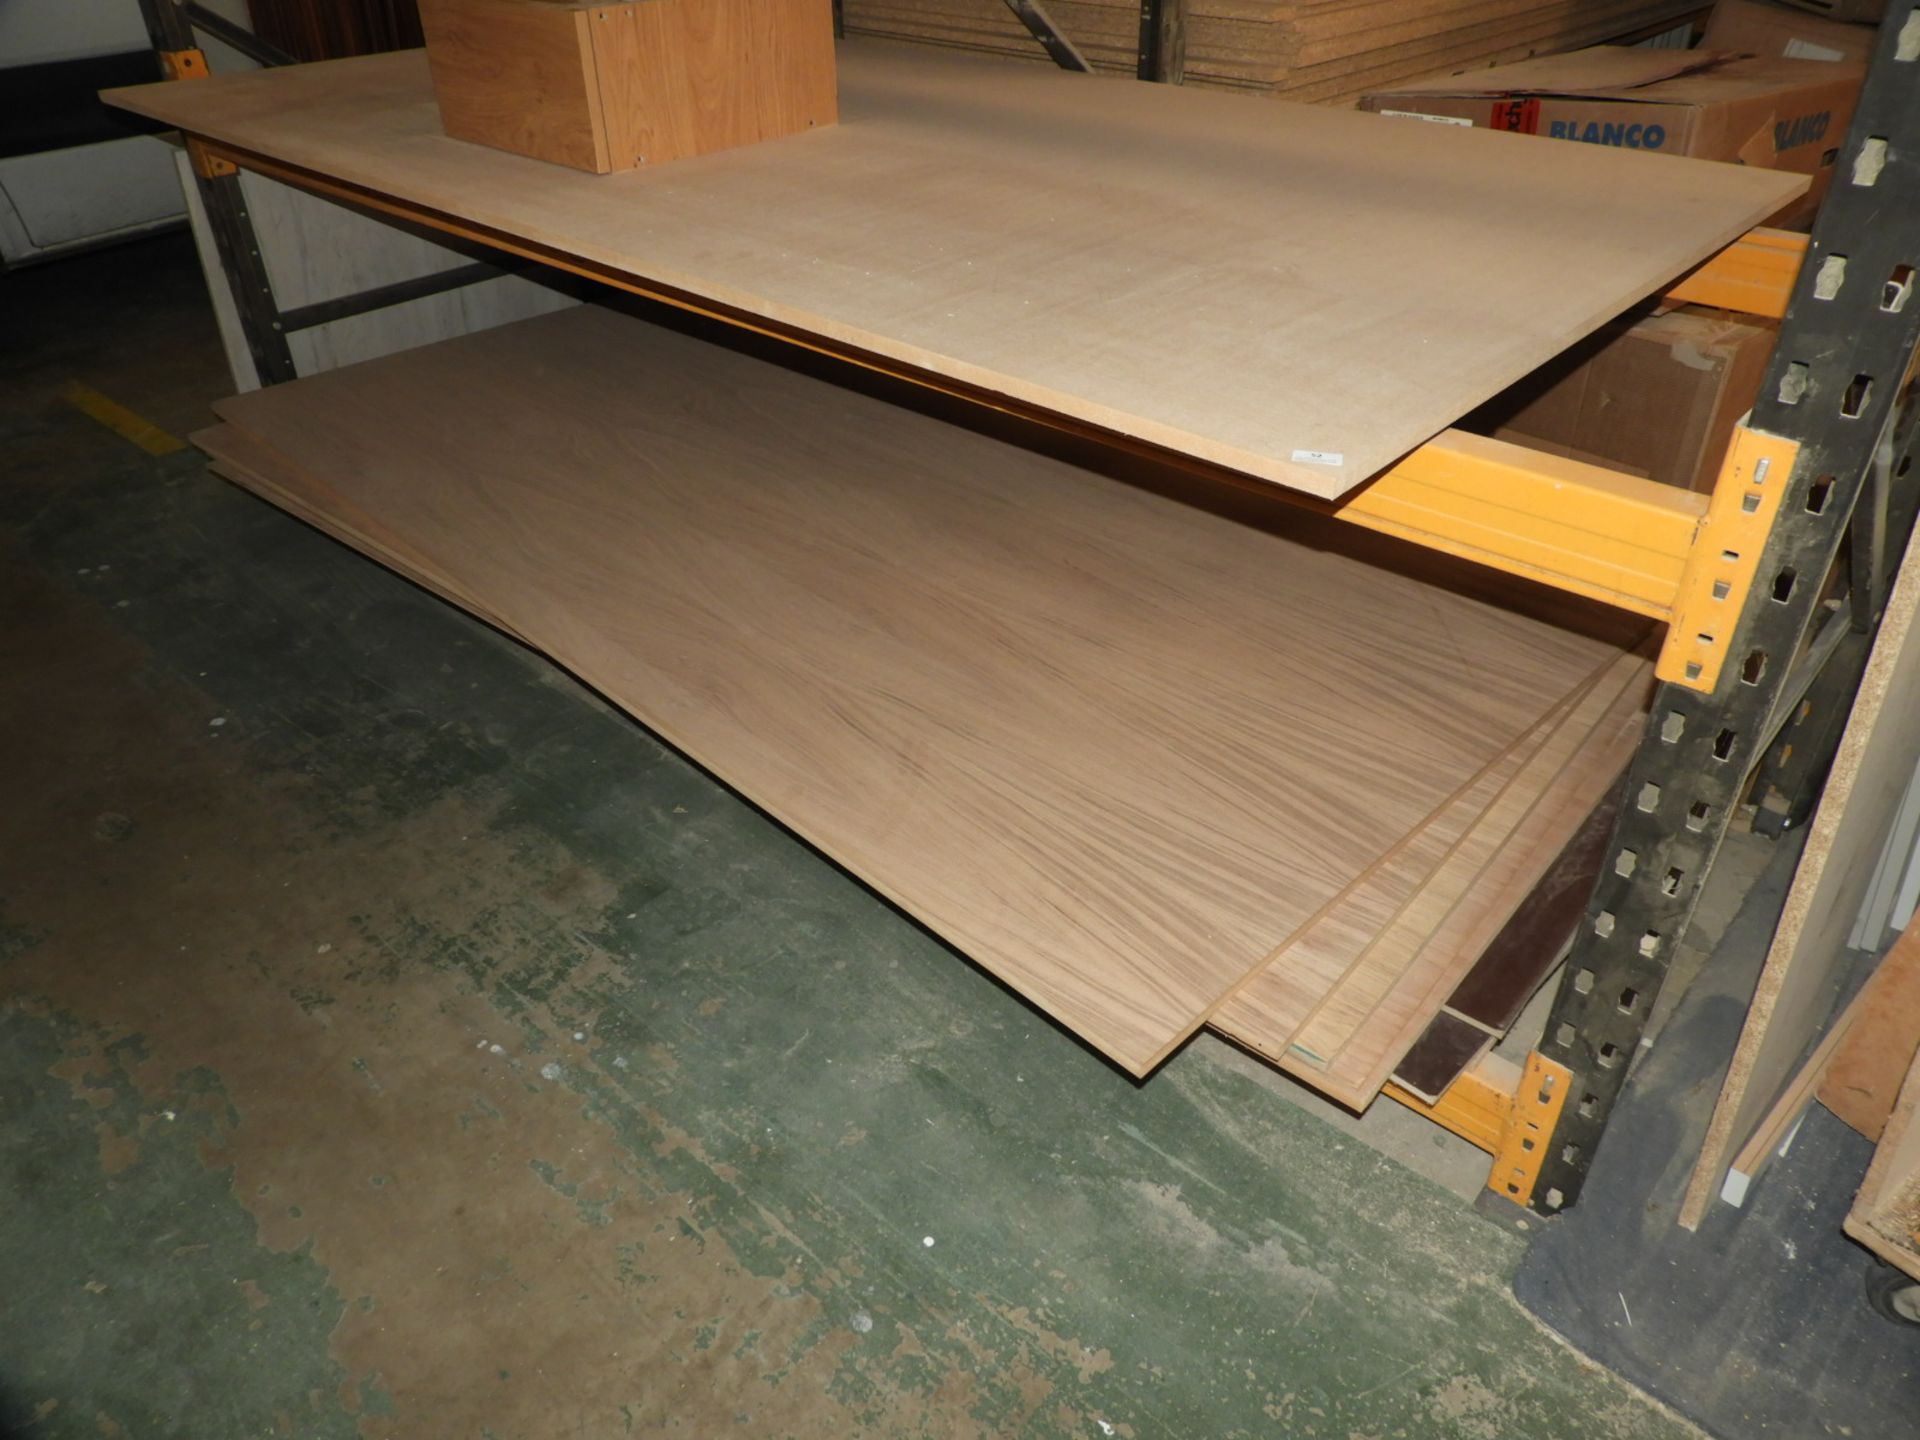 *Six Sheets of Veneer, Faced and Other MDF